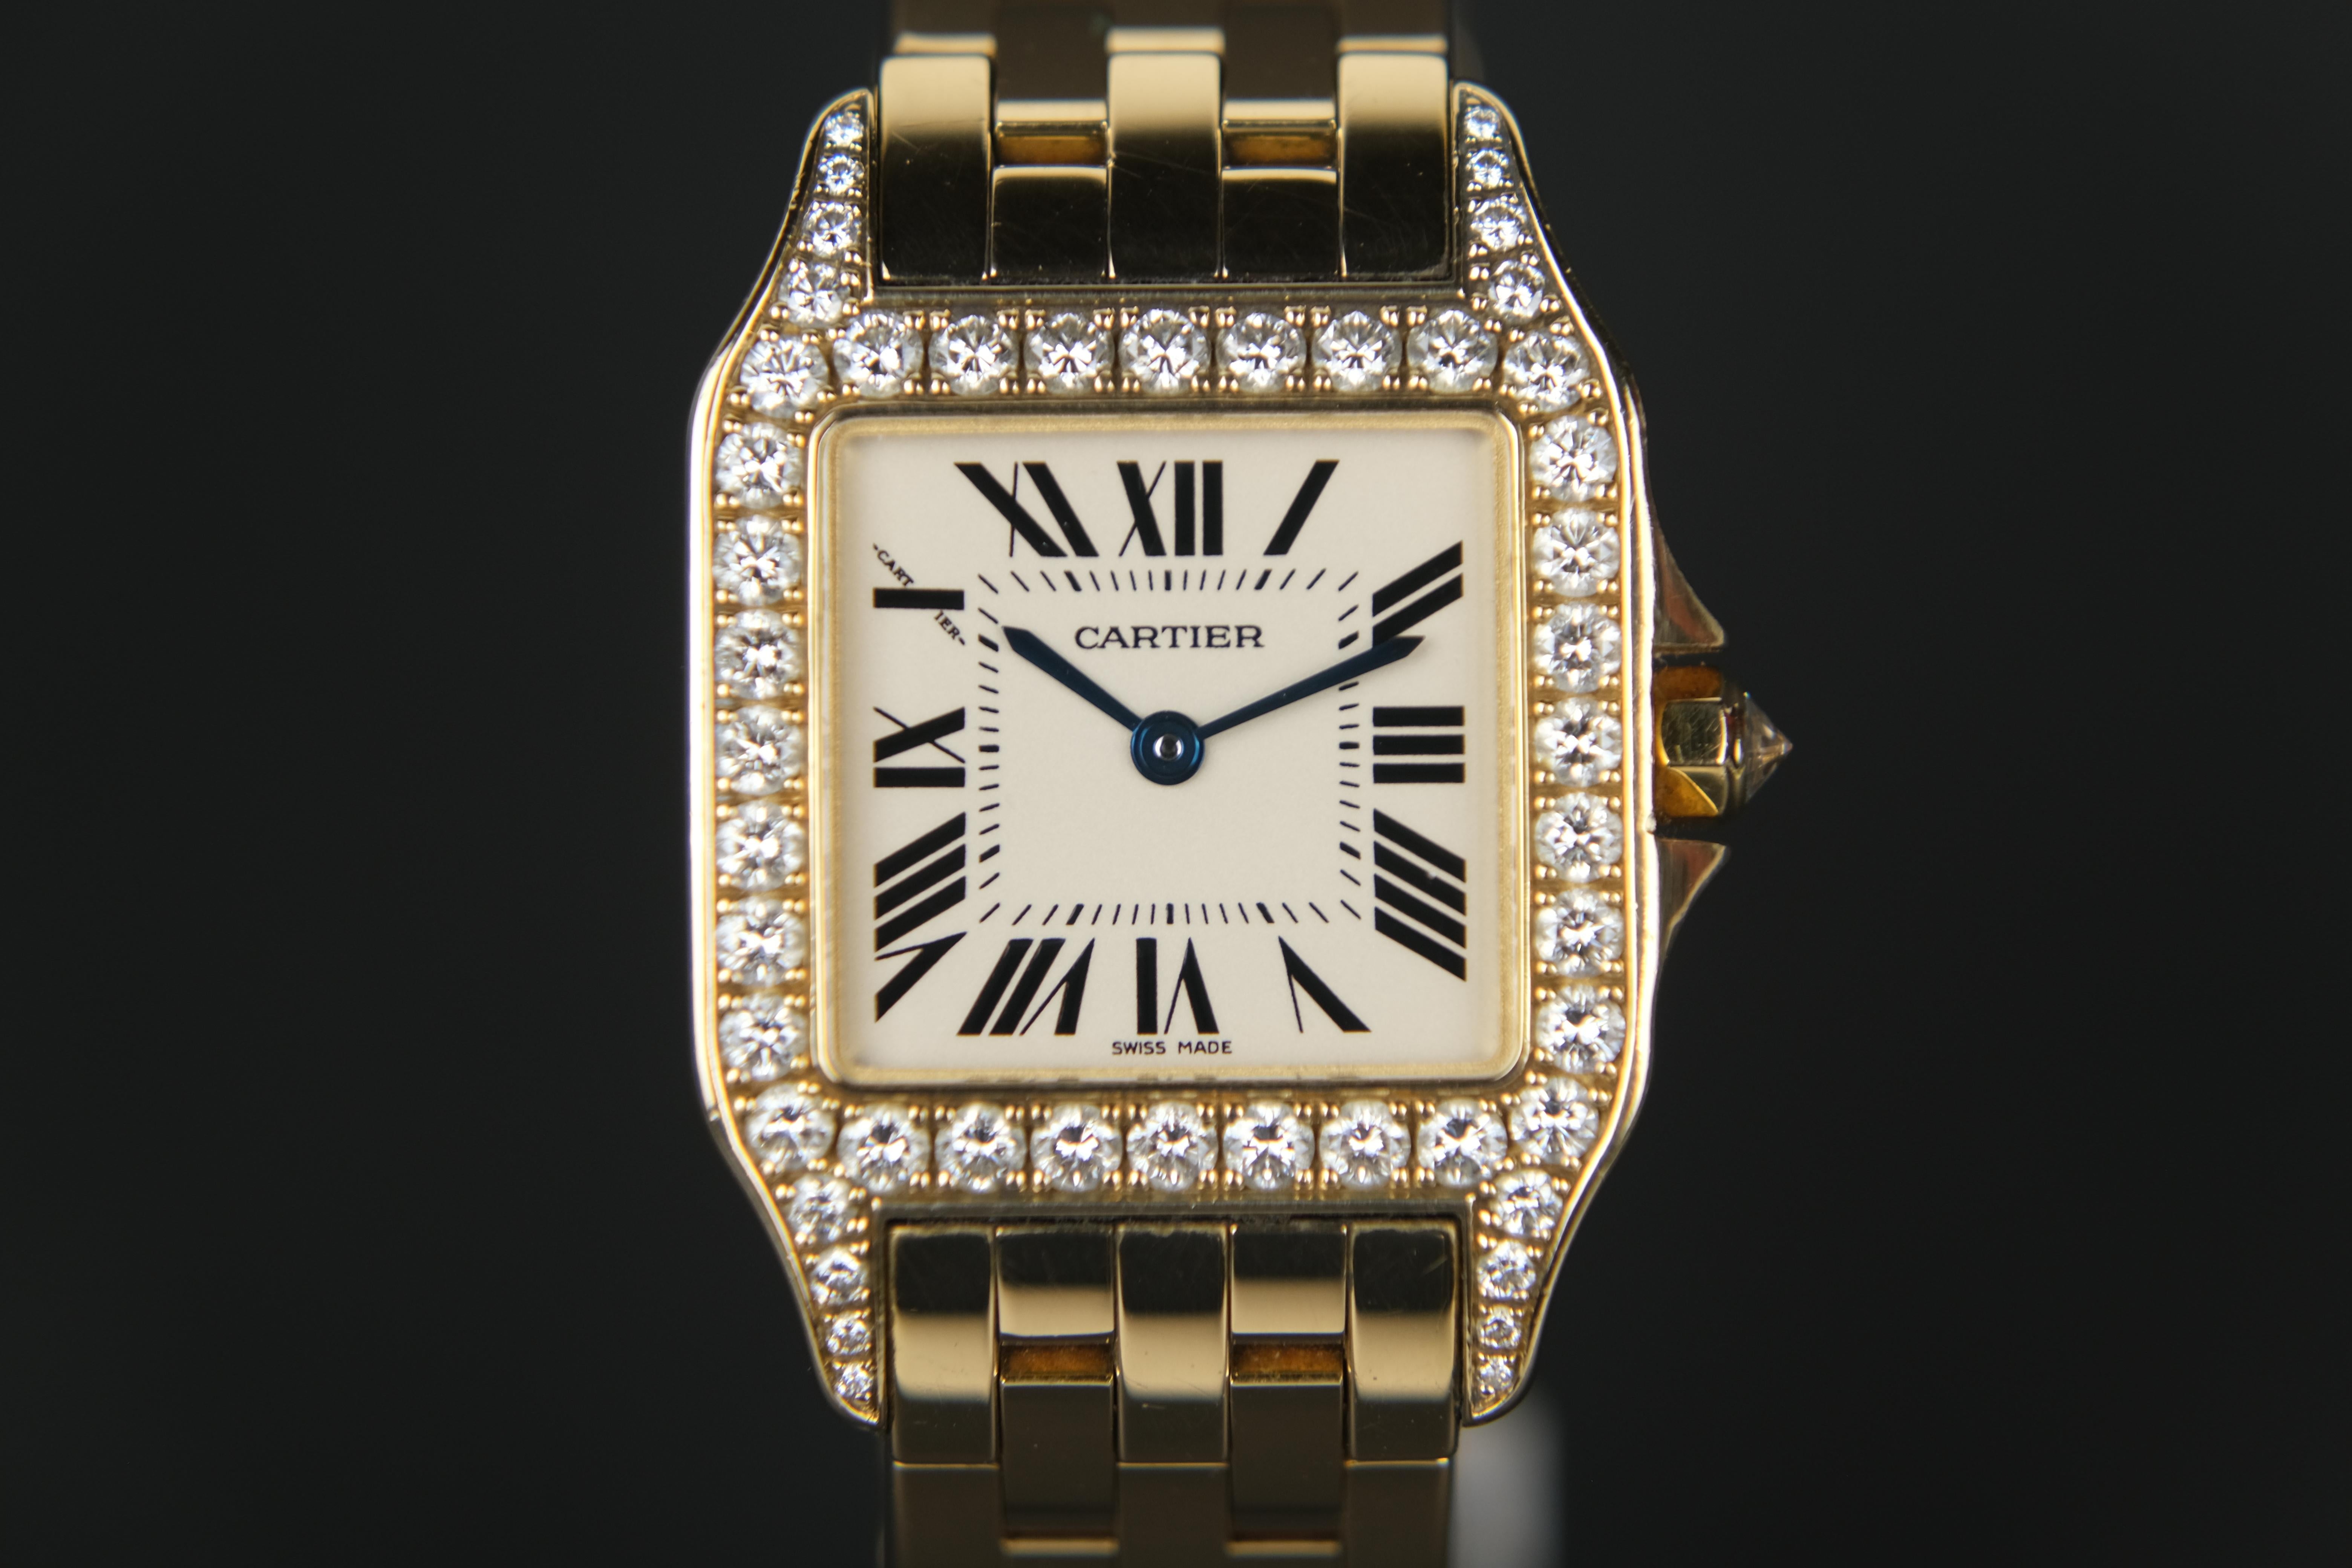 Cartier Santos Demoiselle 18K DIA

Serial Number: 294630CE
Case: 26 mm
Lug: 38 mm
Band: 20 cm
Width: 15 mm

Movement: Quartz
Case Material: Yellow Gold
Bracelet Material: Yellow Gold
Year of production: circa 2016
Condition: Good